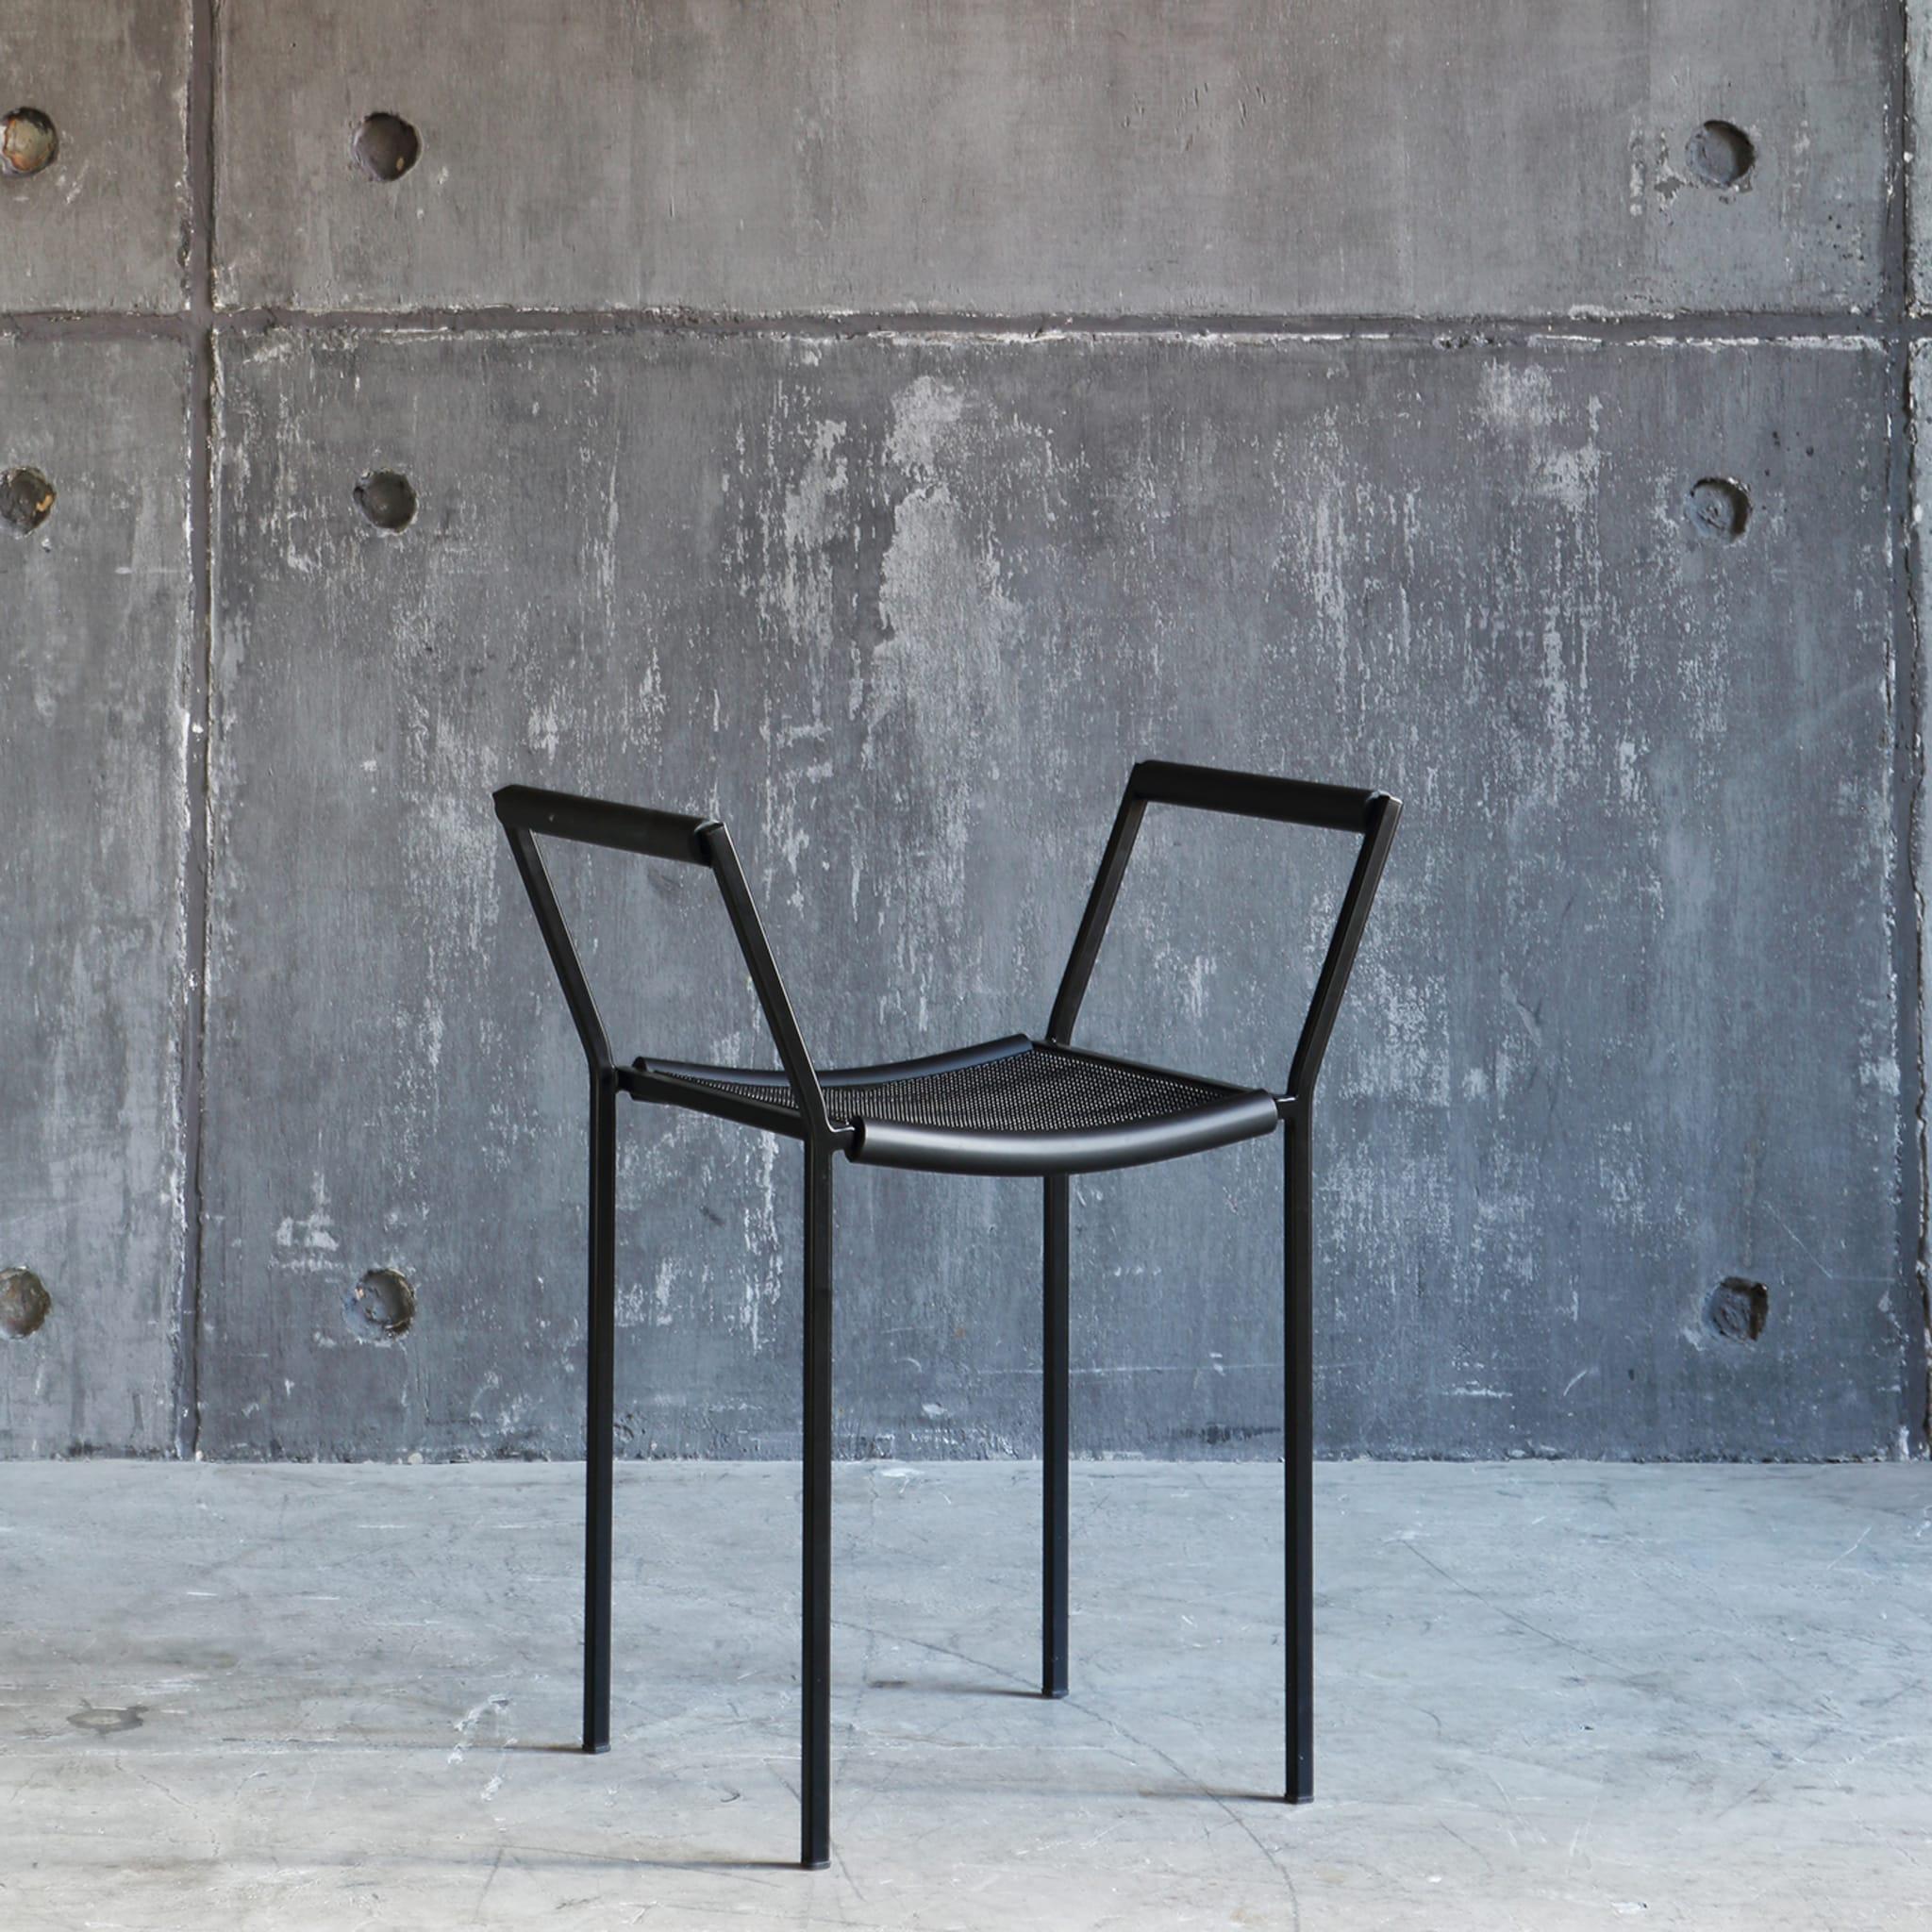 A modern take on Empire chairs, the Savanarola Chair comes in all new materials to give off a unique vibe. On a pure steel frame, the chair is coated with a semi-opaque black finish. The seat and armrests are then covered in textured black rubber,